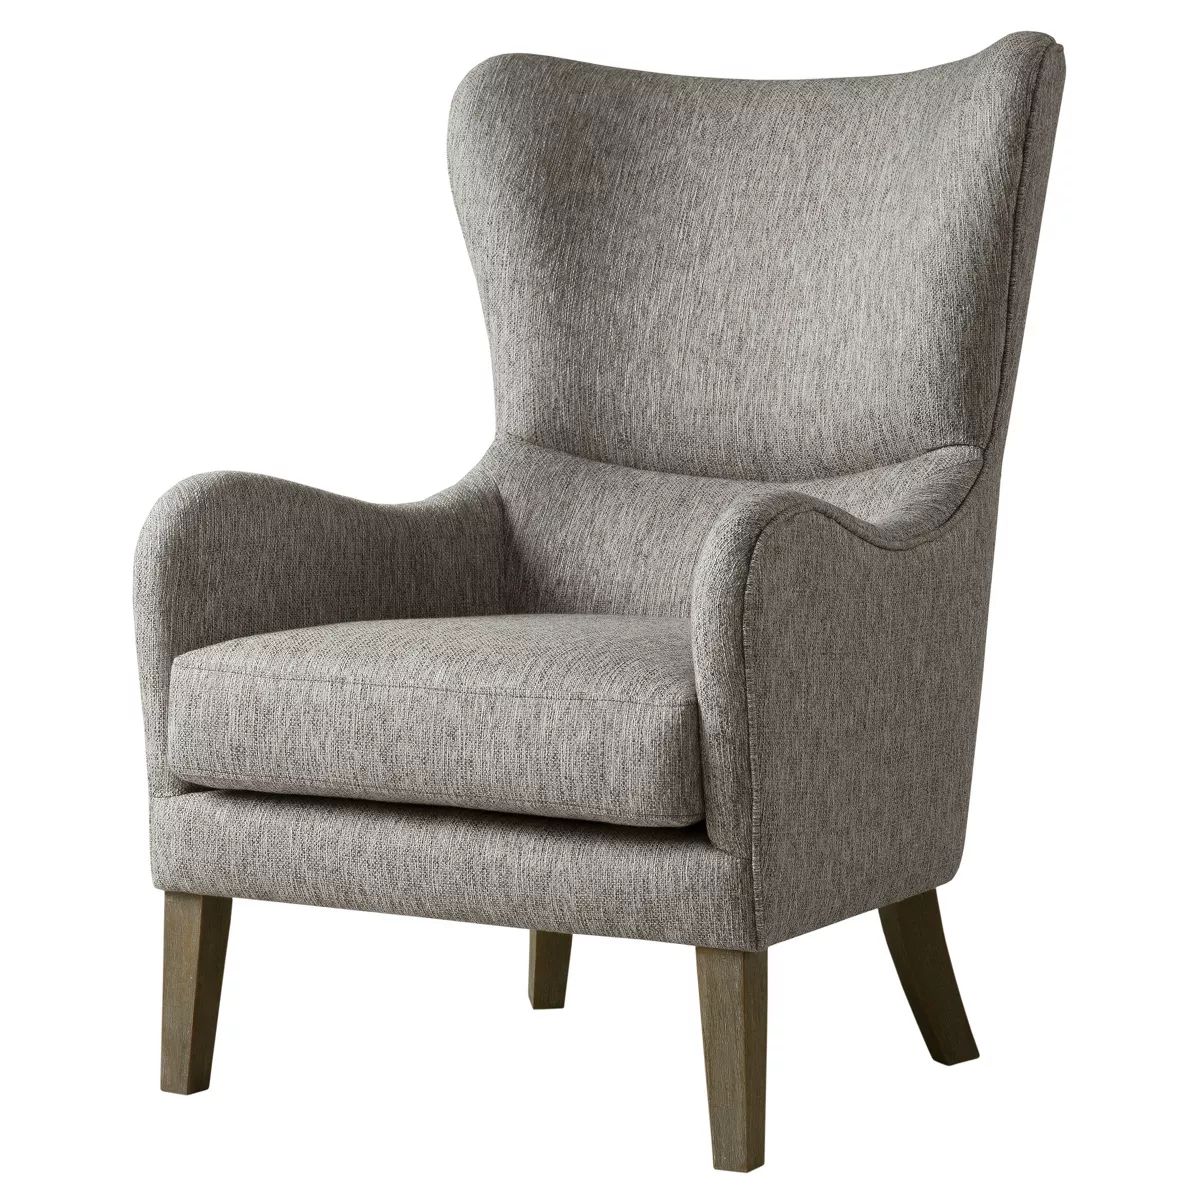 Aria Swoop Upholstered Wing Chair | Target